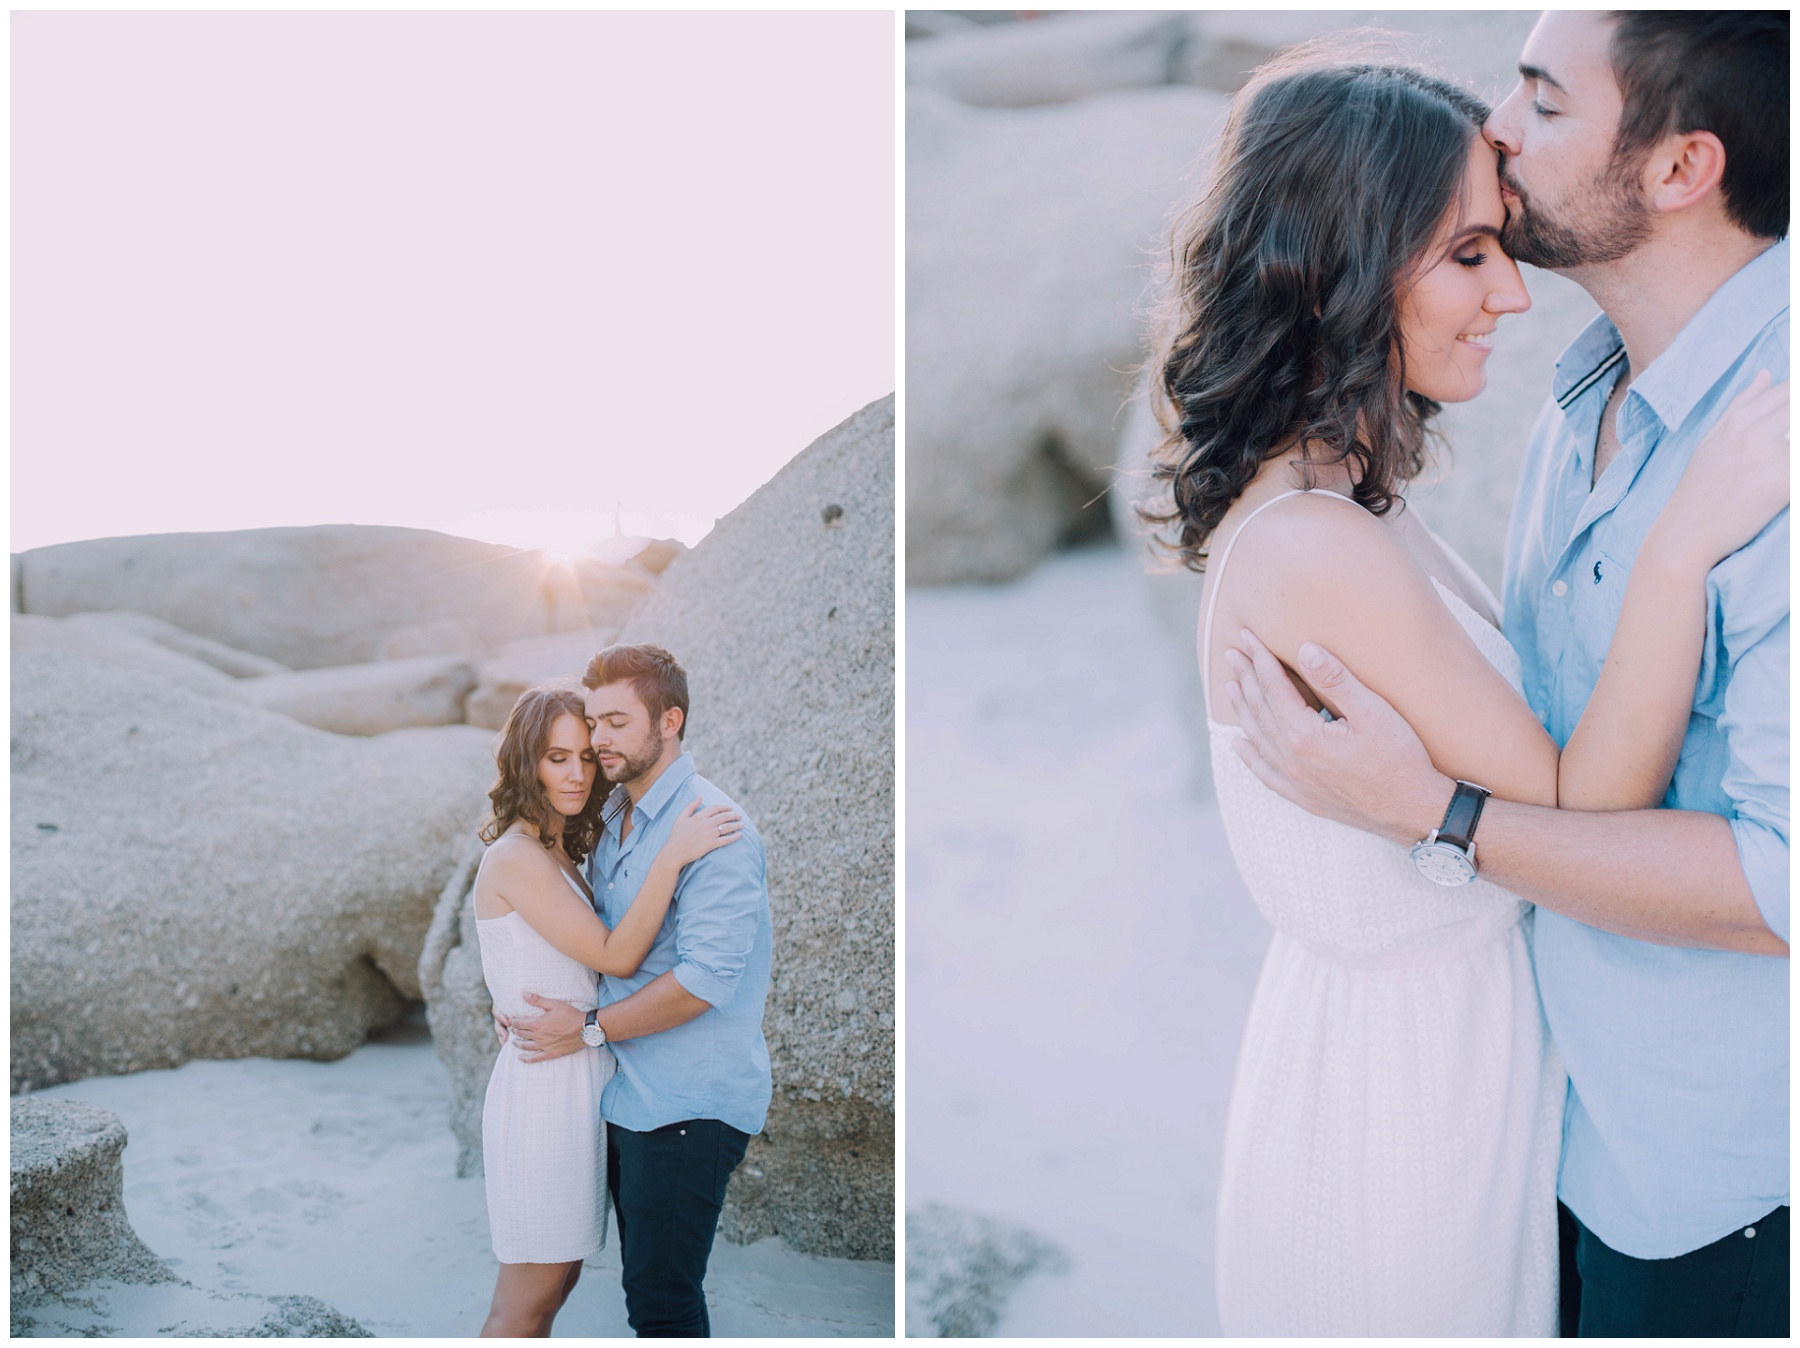 Ronel Kruger Cape Town Wedding and Lifestyle Photographer_8462.jpg